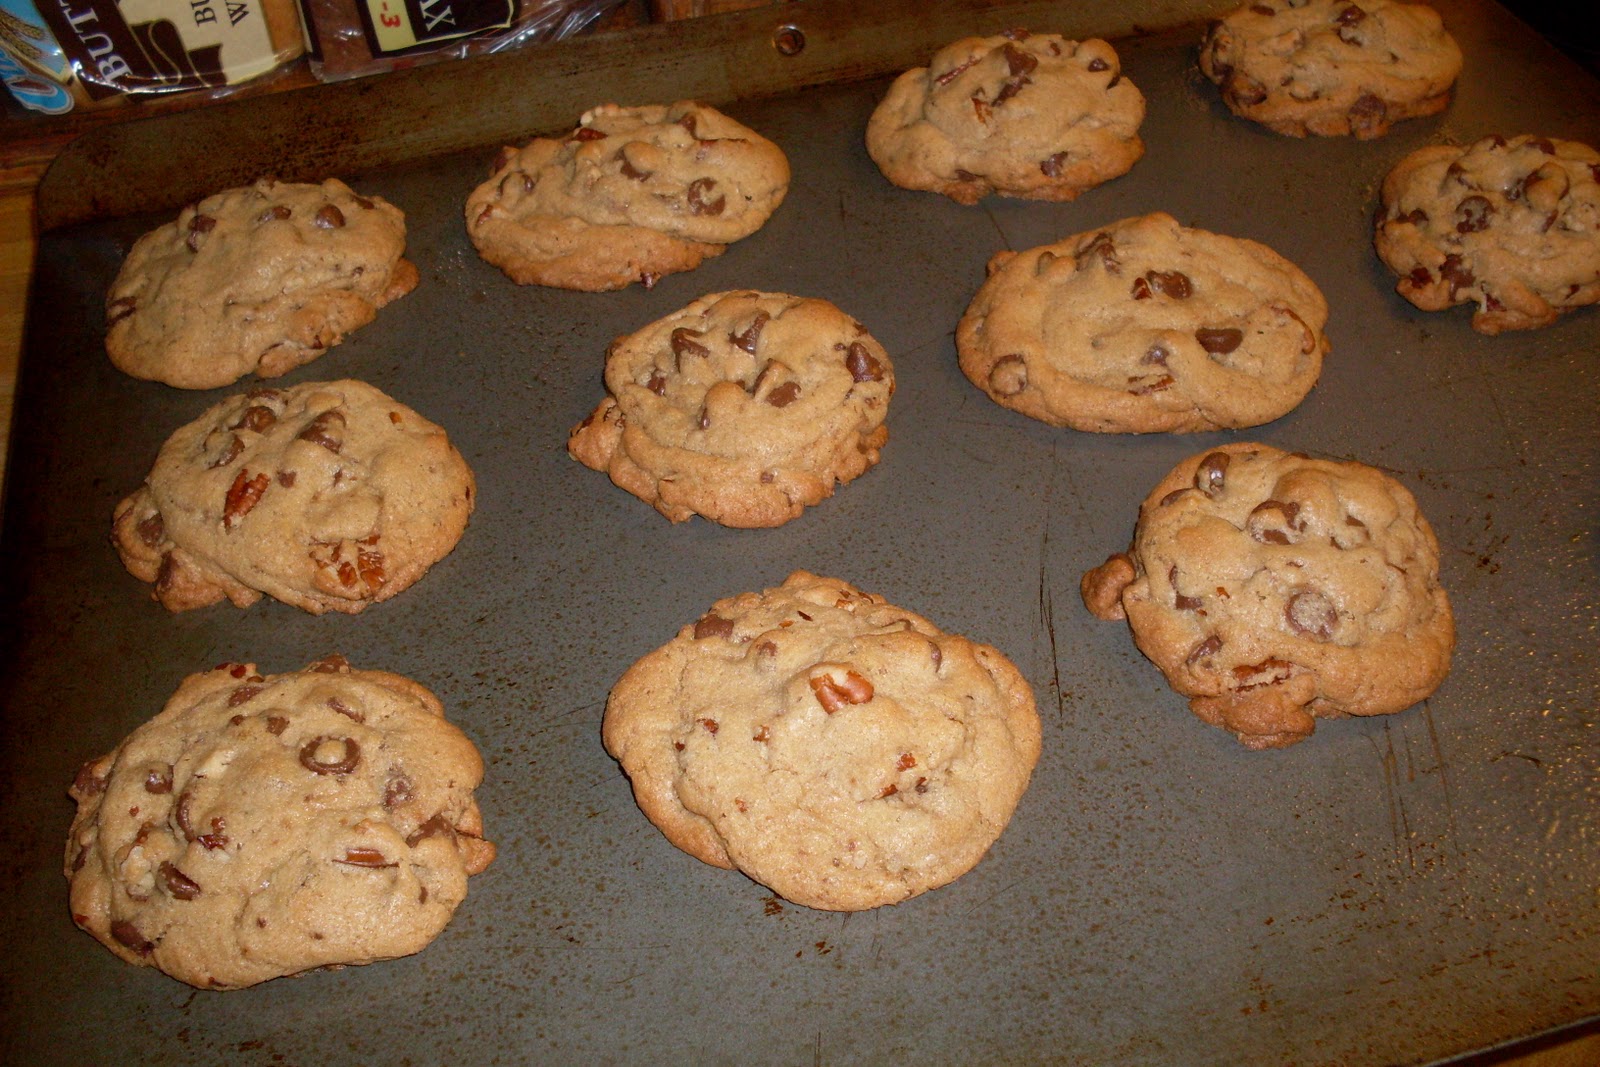 The Best Chocolate Chip Cookies I Have Ever Made! Recipe rewind